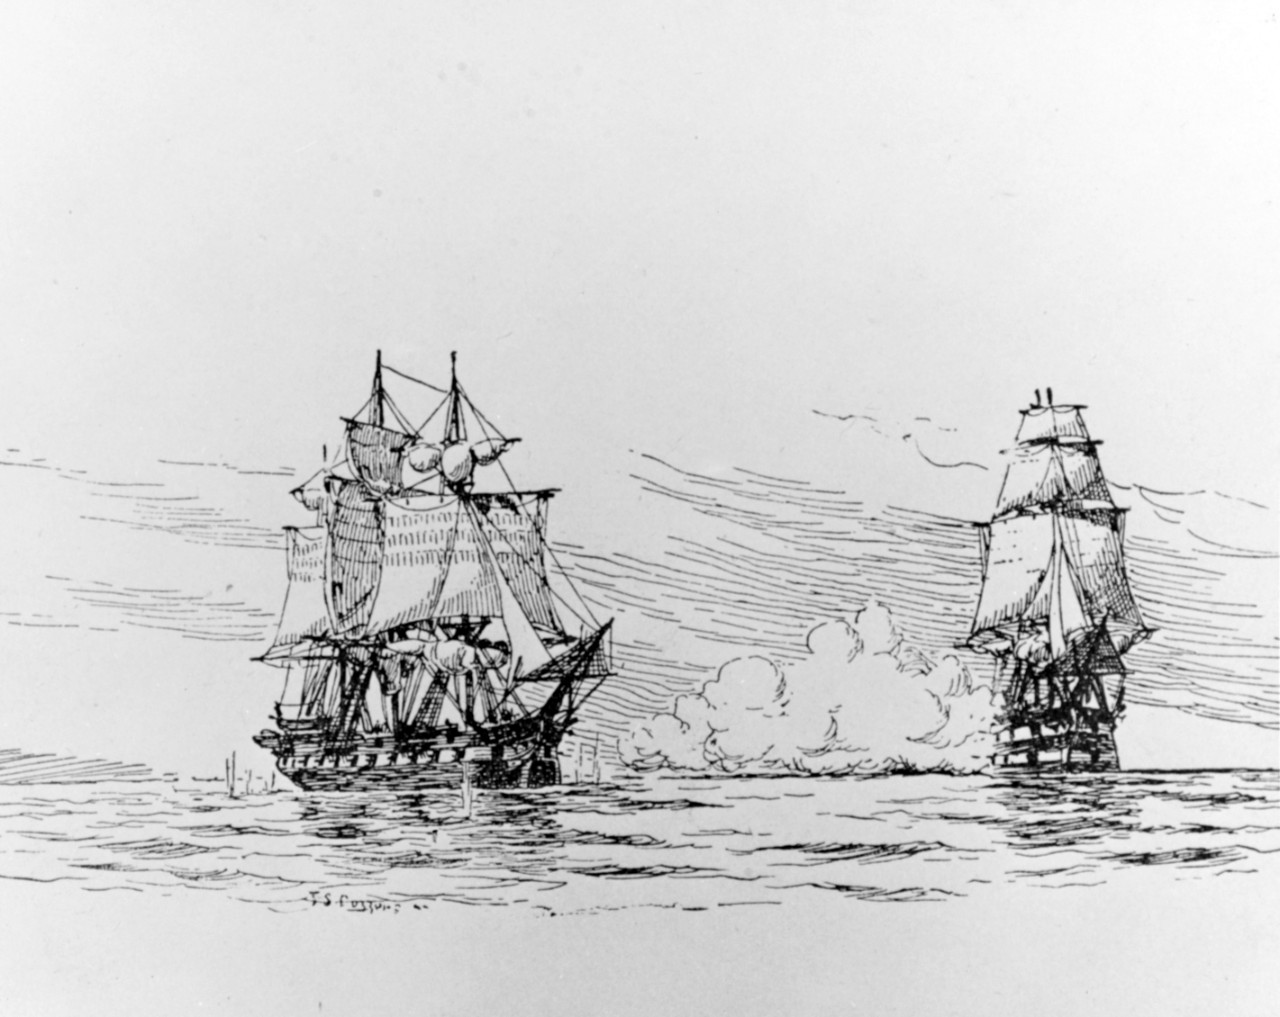 Photo #: NH 74526  Action between USS Chesapeake and HMS Leopard, 22 June 1807